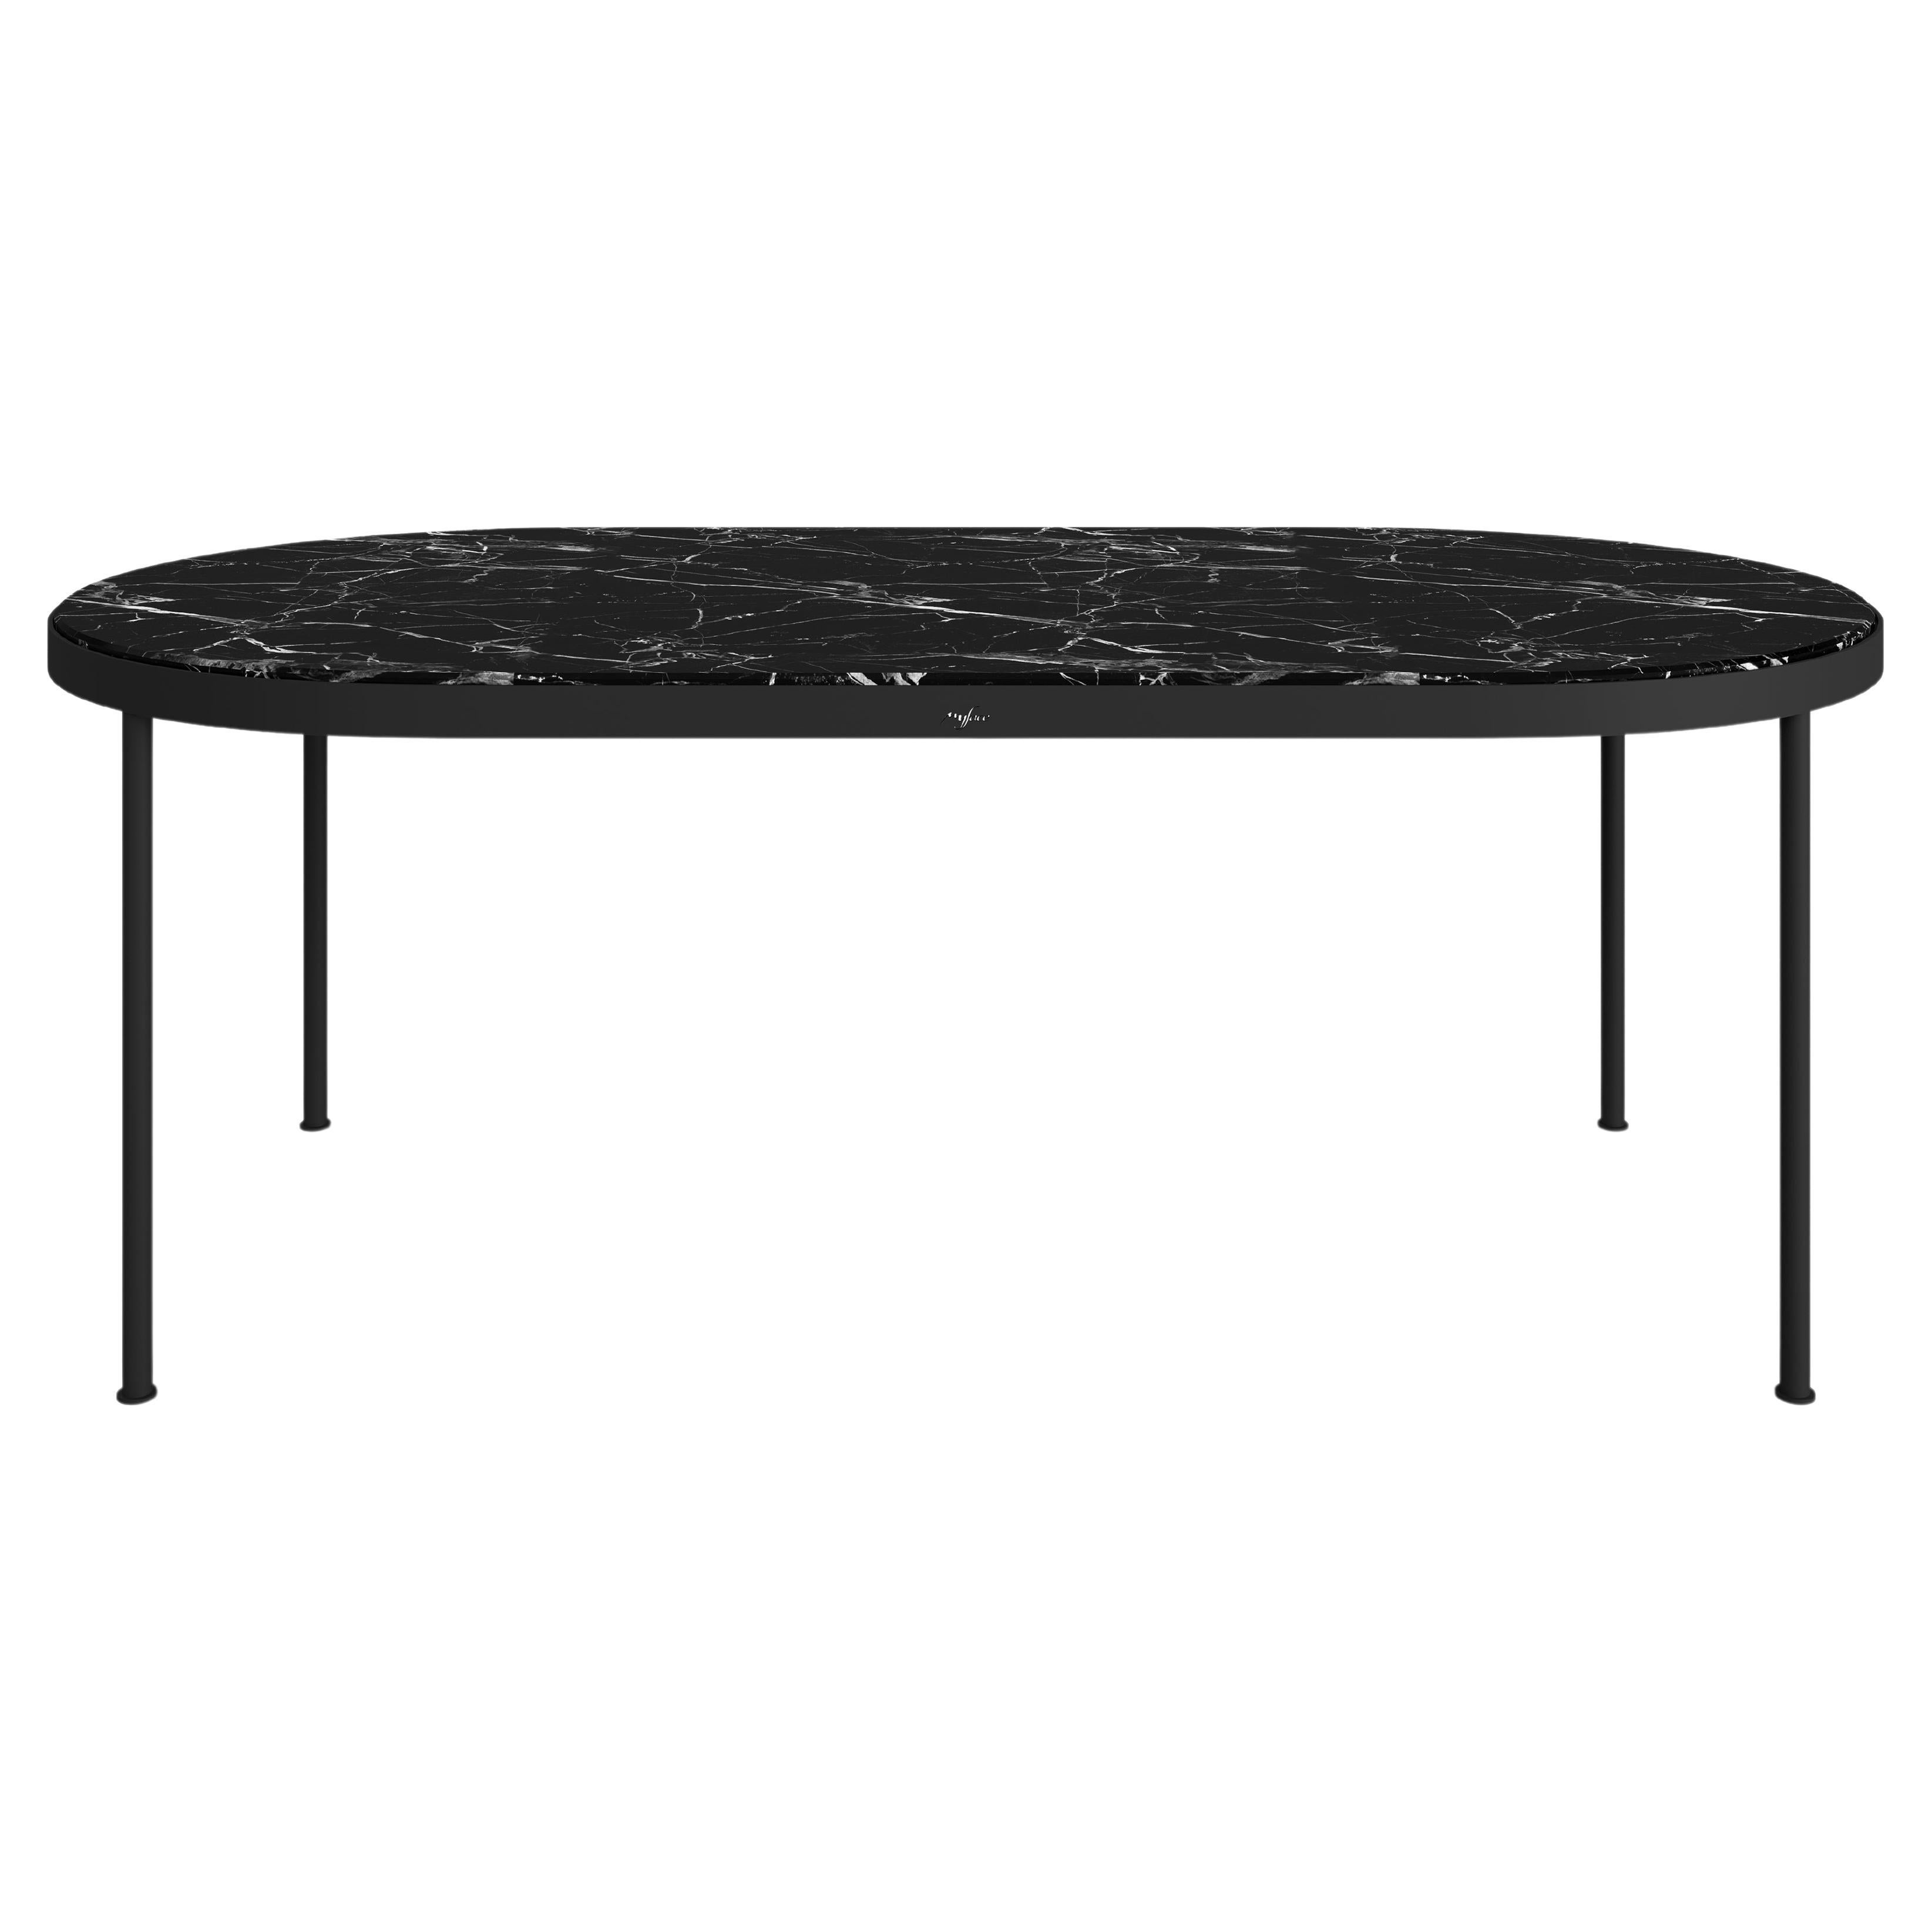 Modern Nero Marquina Marble Outdoor Dining Table Big with Lacquered Legs For Sale